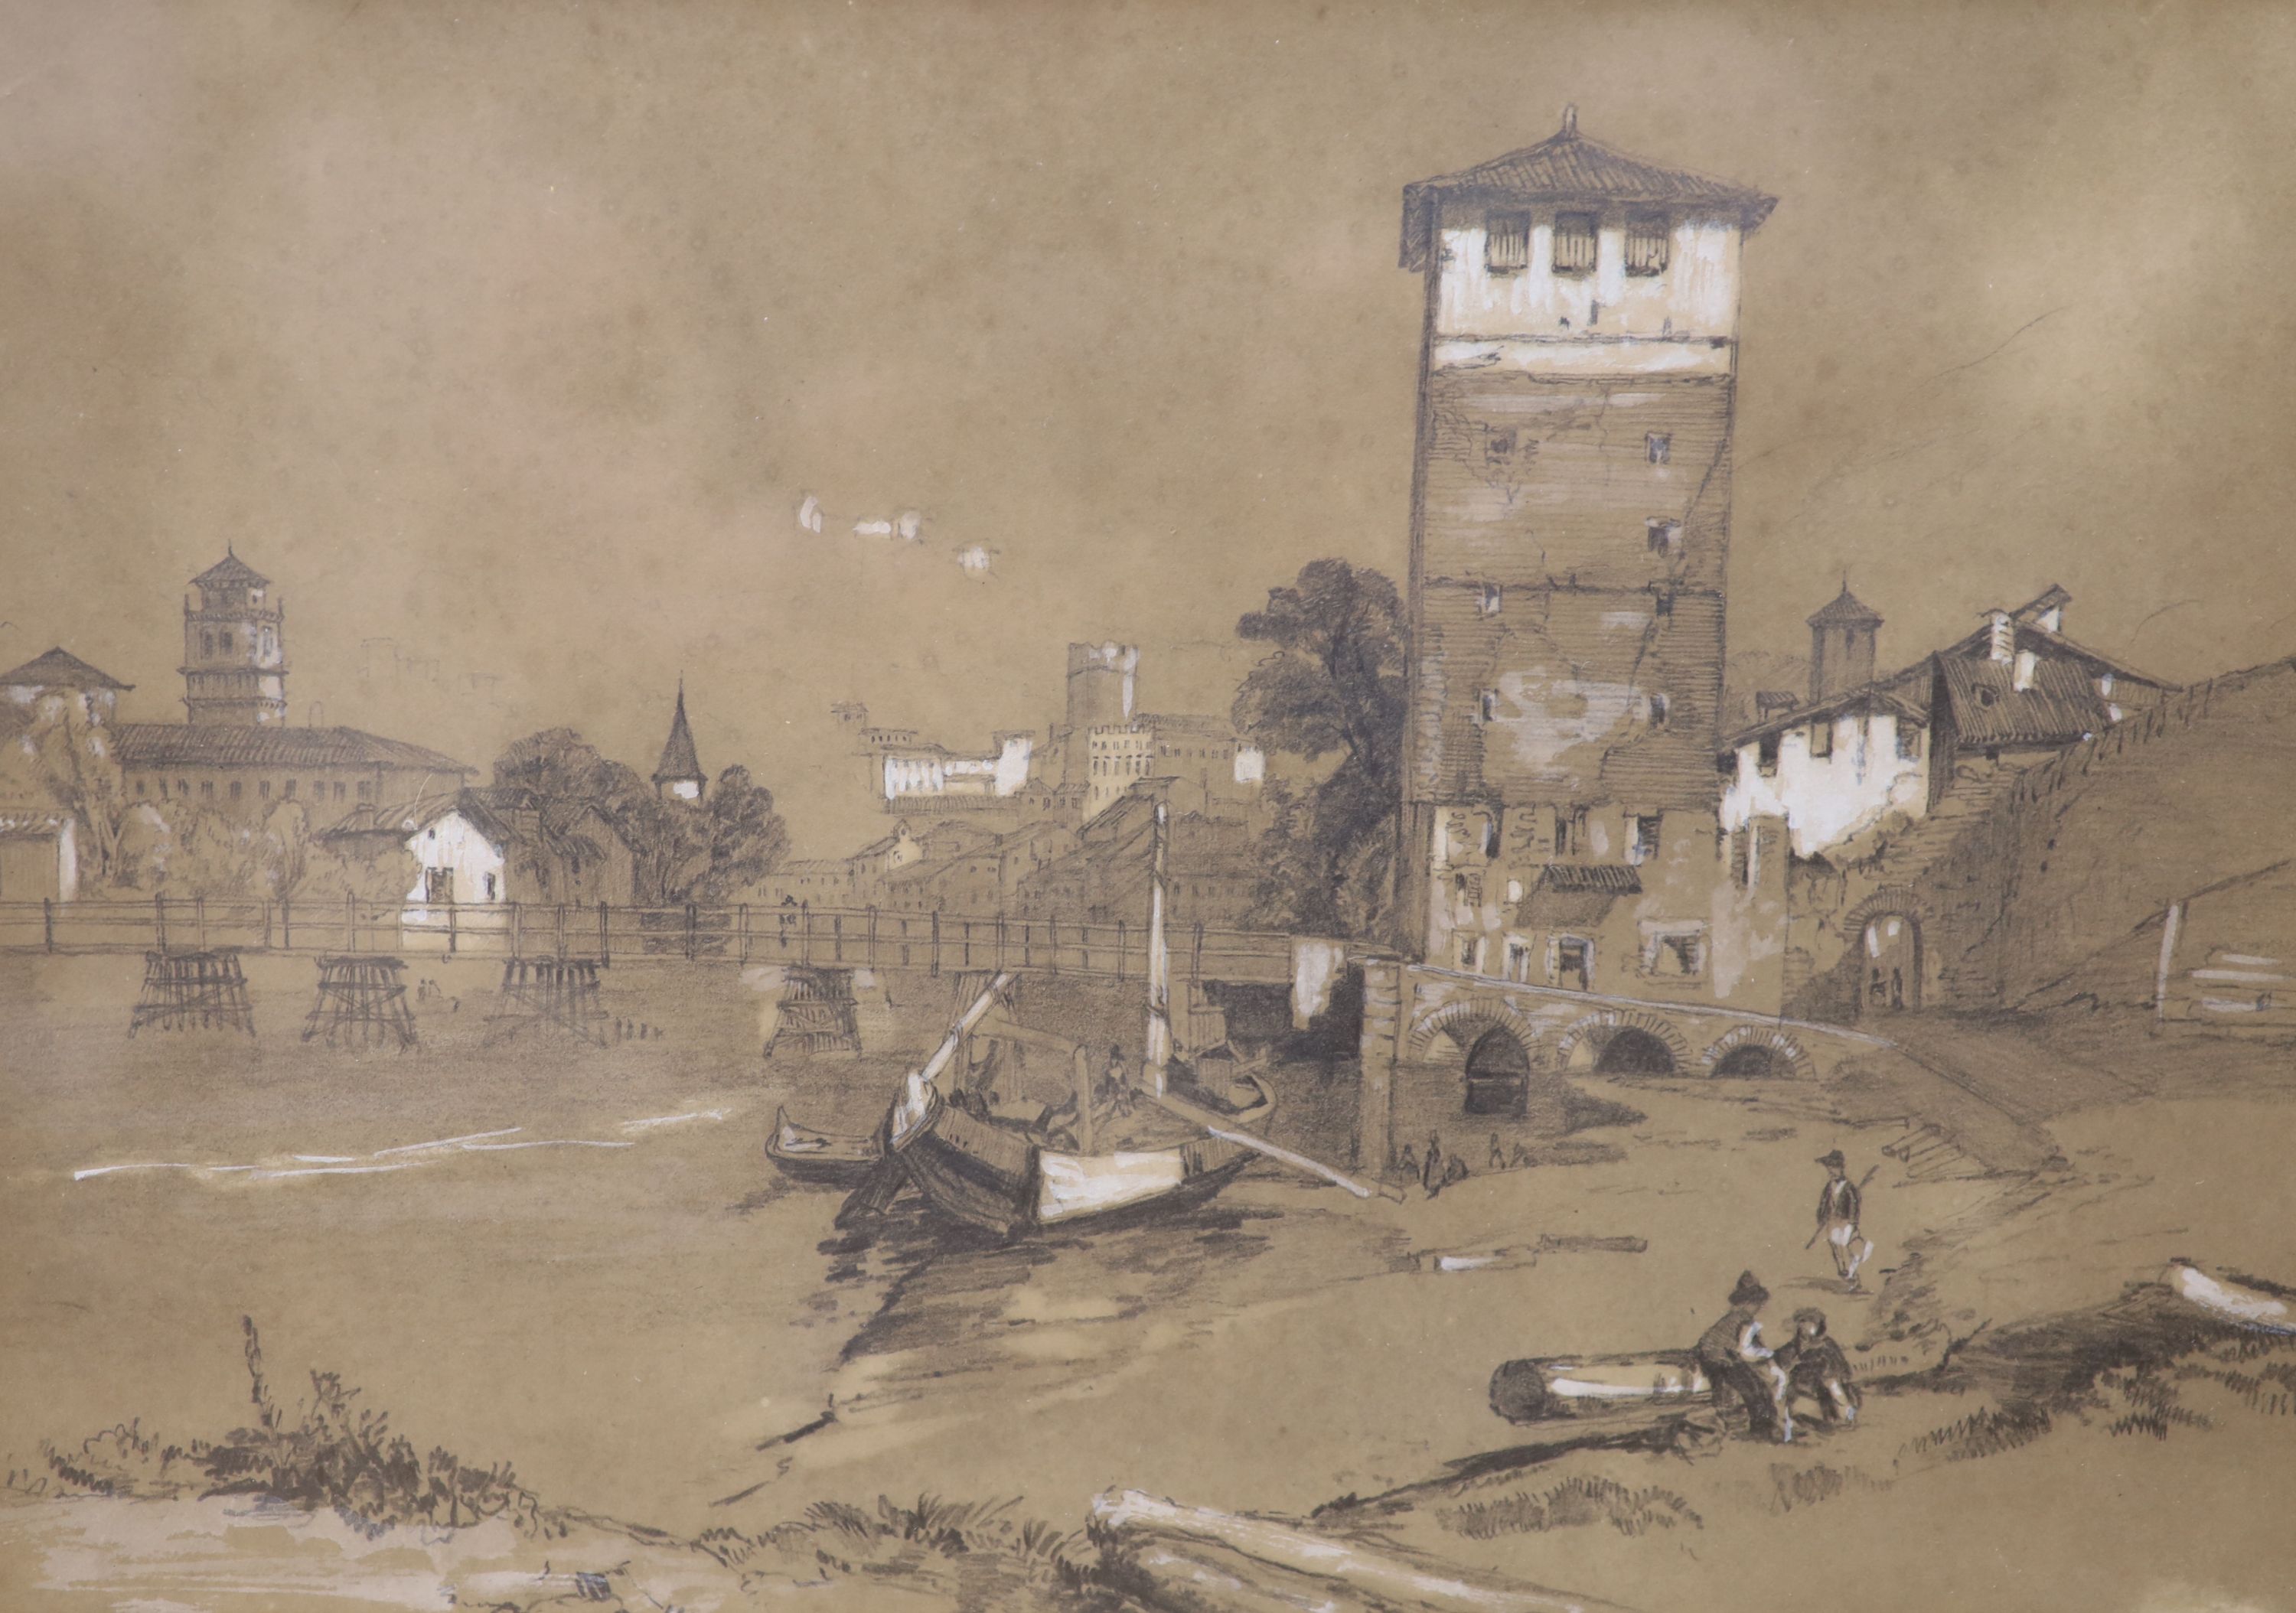 Attributed to James Duffield Harding, pencil heightened with wash, Continental riverside town, 23 x 33cm